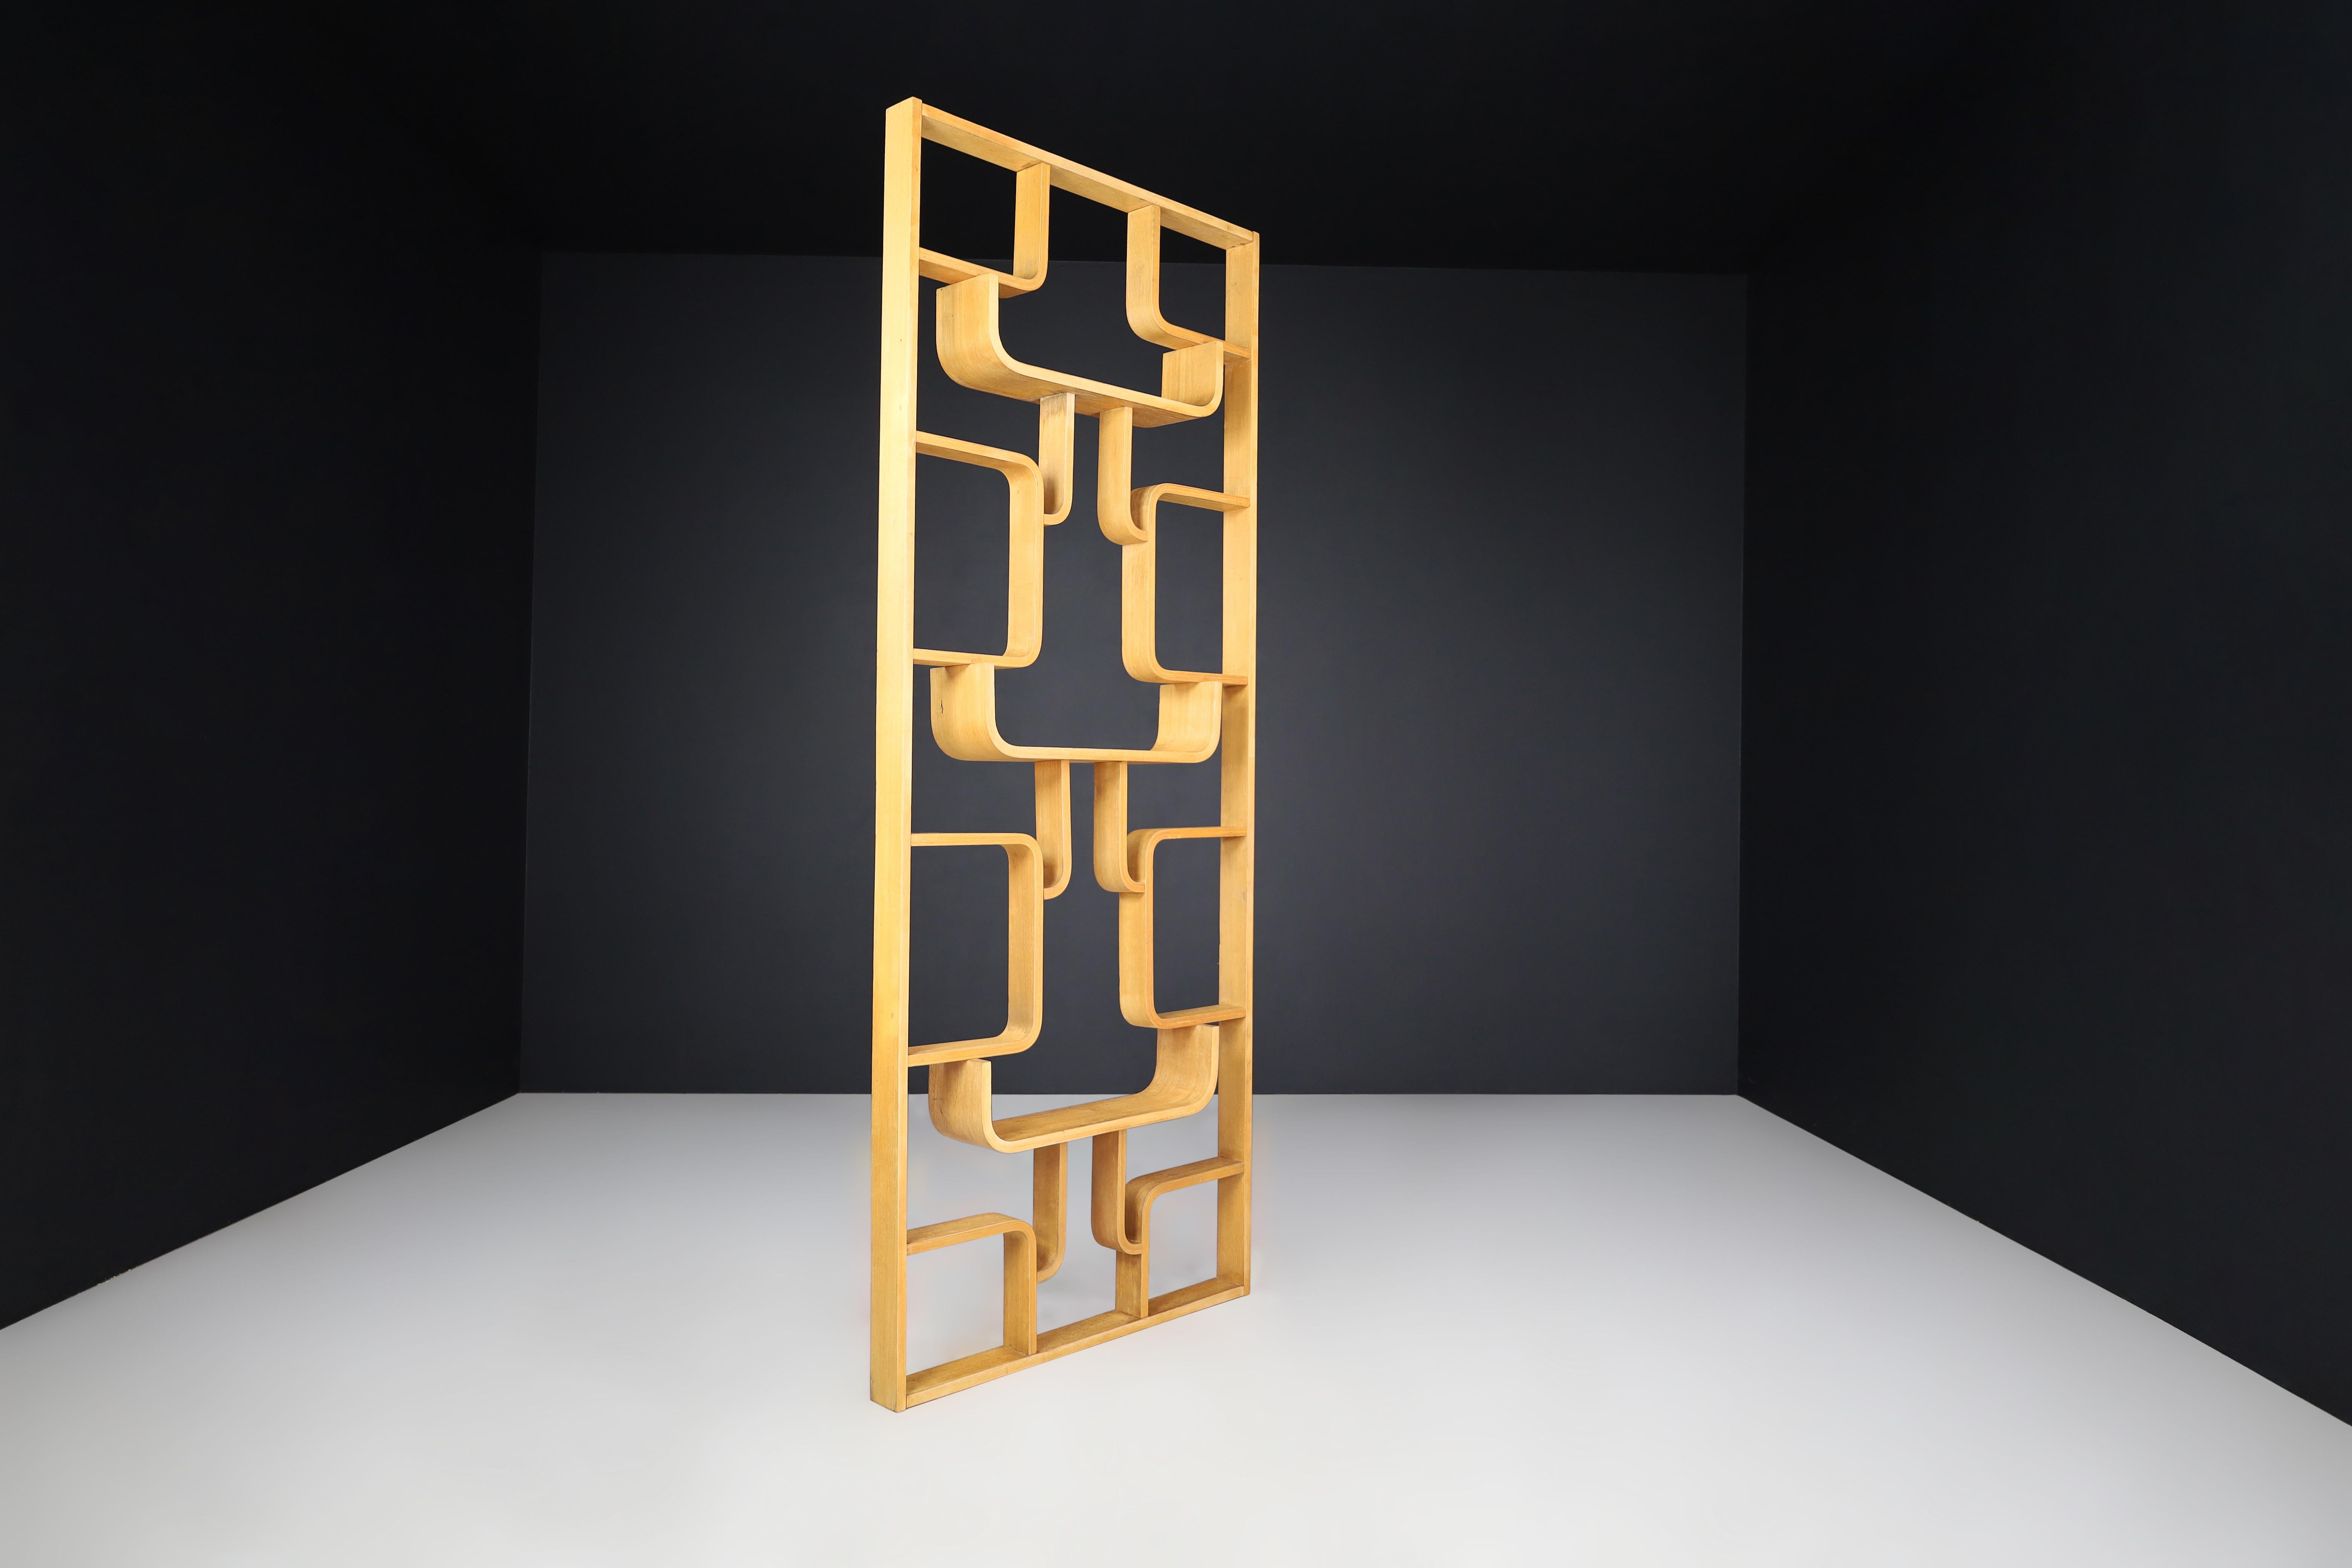 Midcentury Room Divider by Ludvik Volak for Drevopodnik Holesov, 1960s

This midcentury room divider is made of Bent-Wood by Ludvik Volak and was manufactured in Czechoslovakia by Drevopodnik Holesov in the 1960s. It was bought from the original